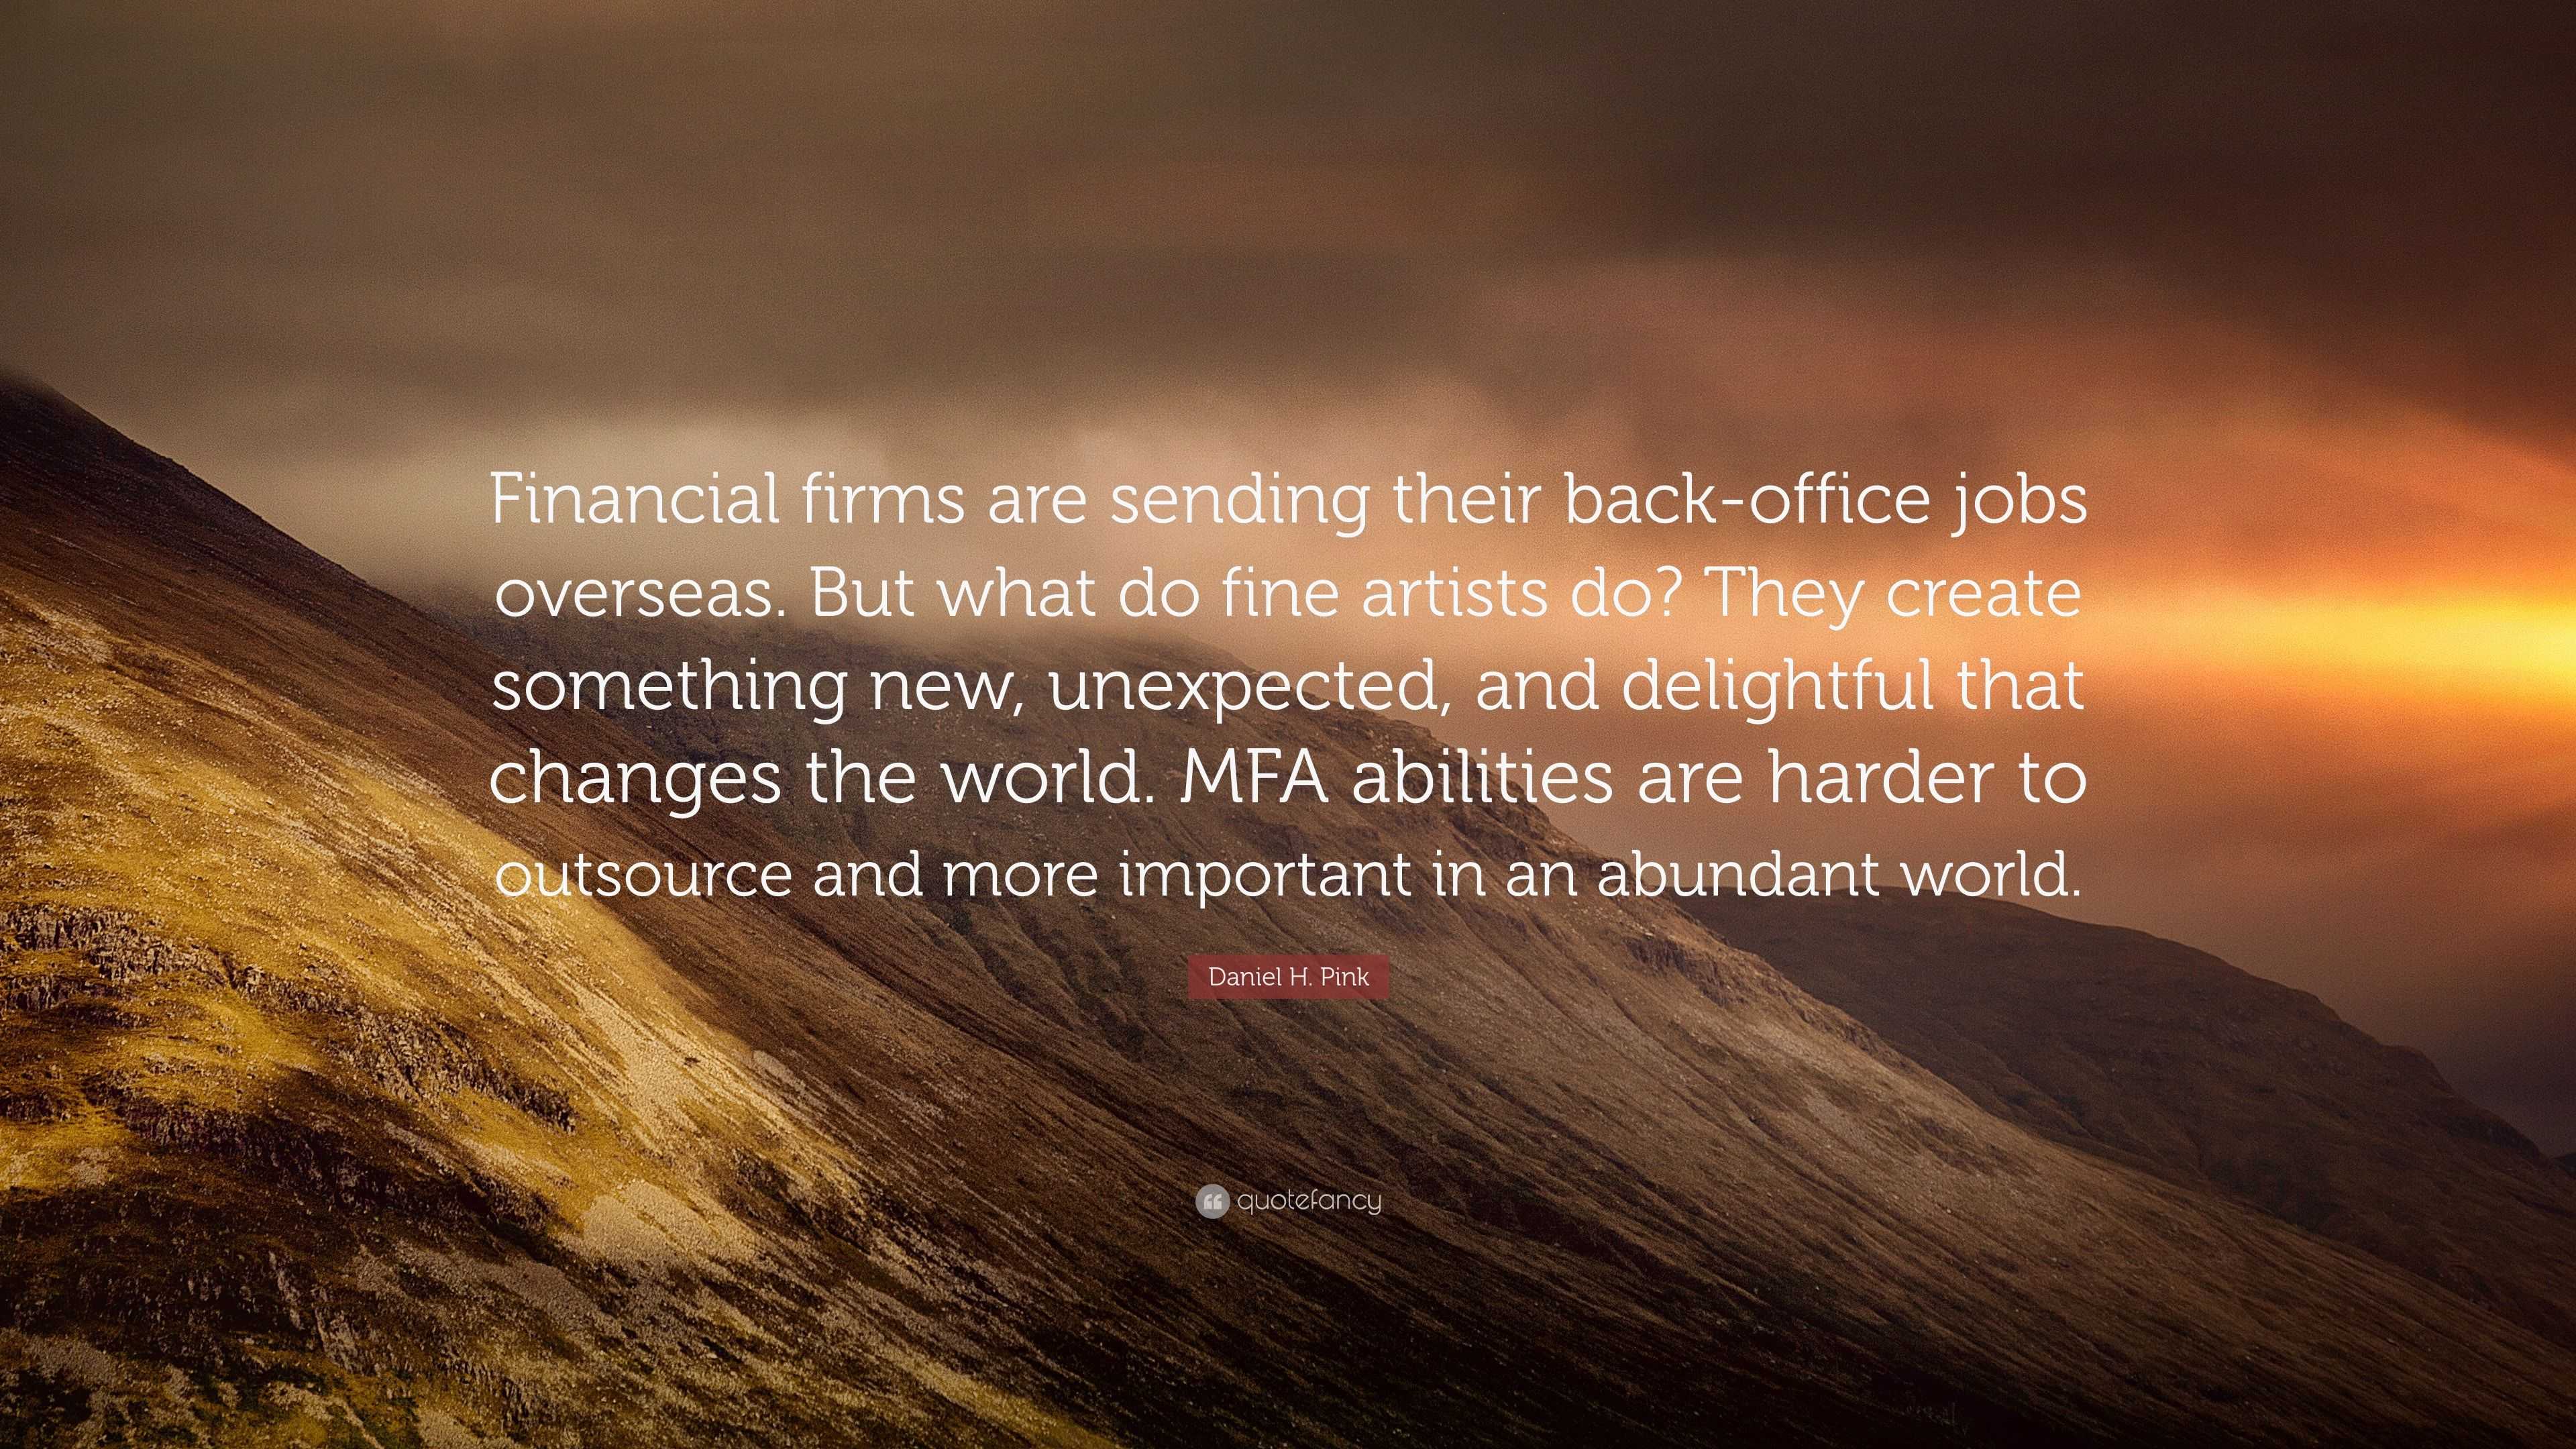 Daniel H. Pink Quote “Financial firms are sending their backoffice